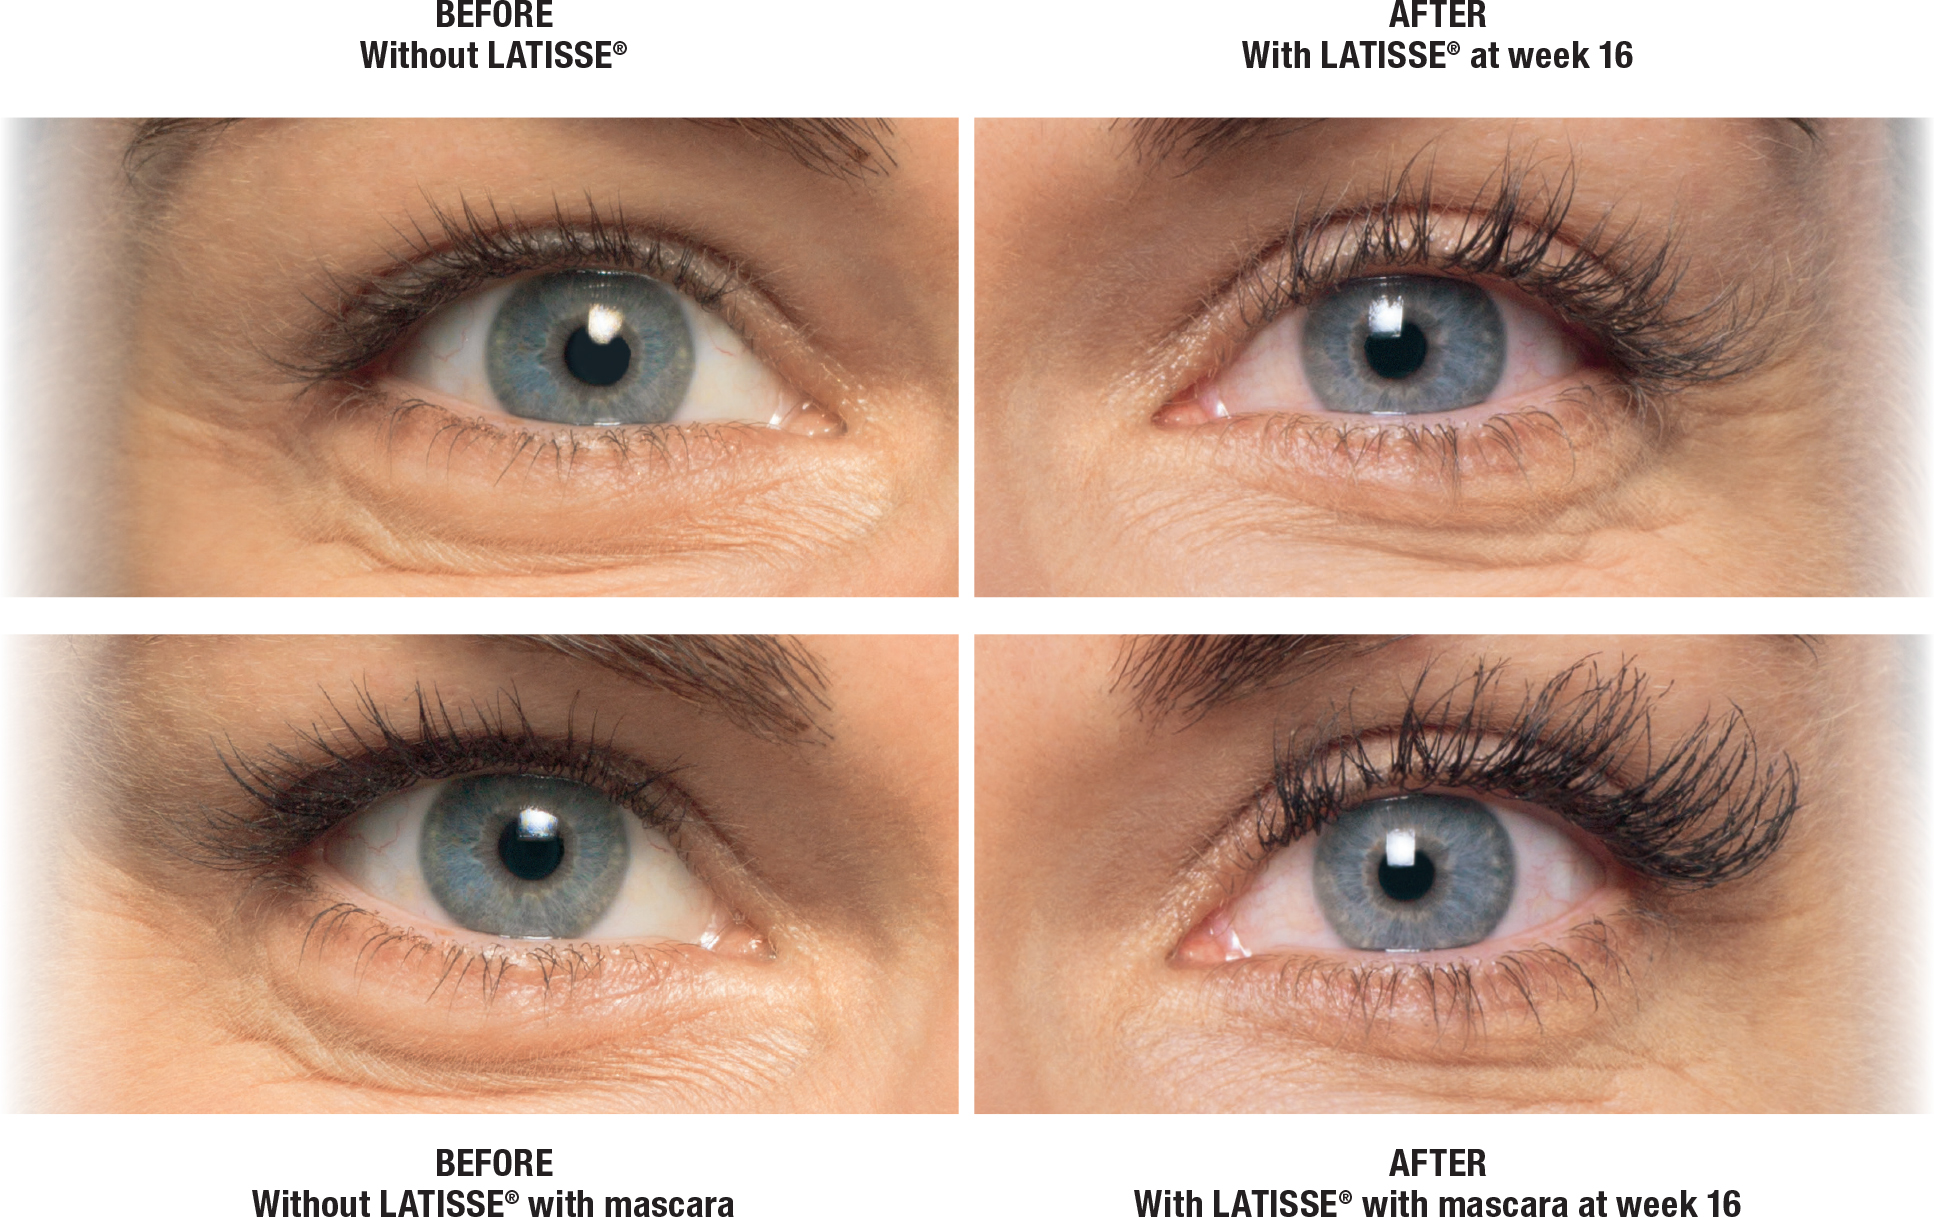 Patient eyelash before and after 1 weeks of Latisse usage